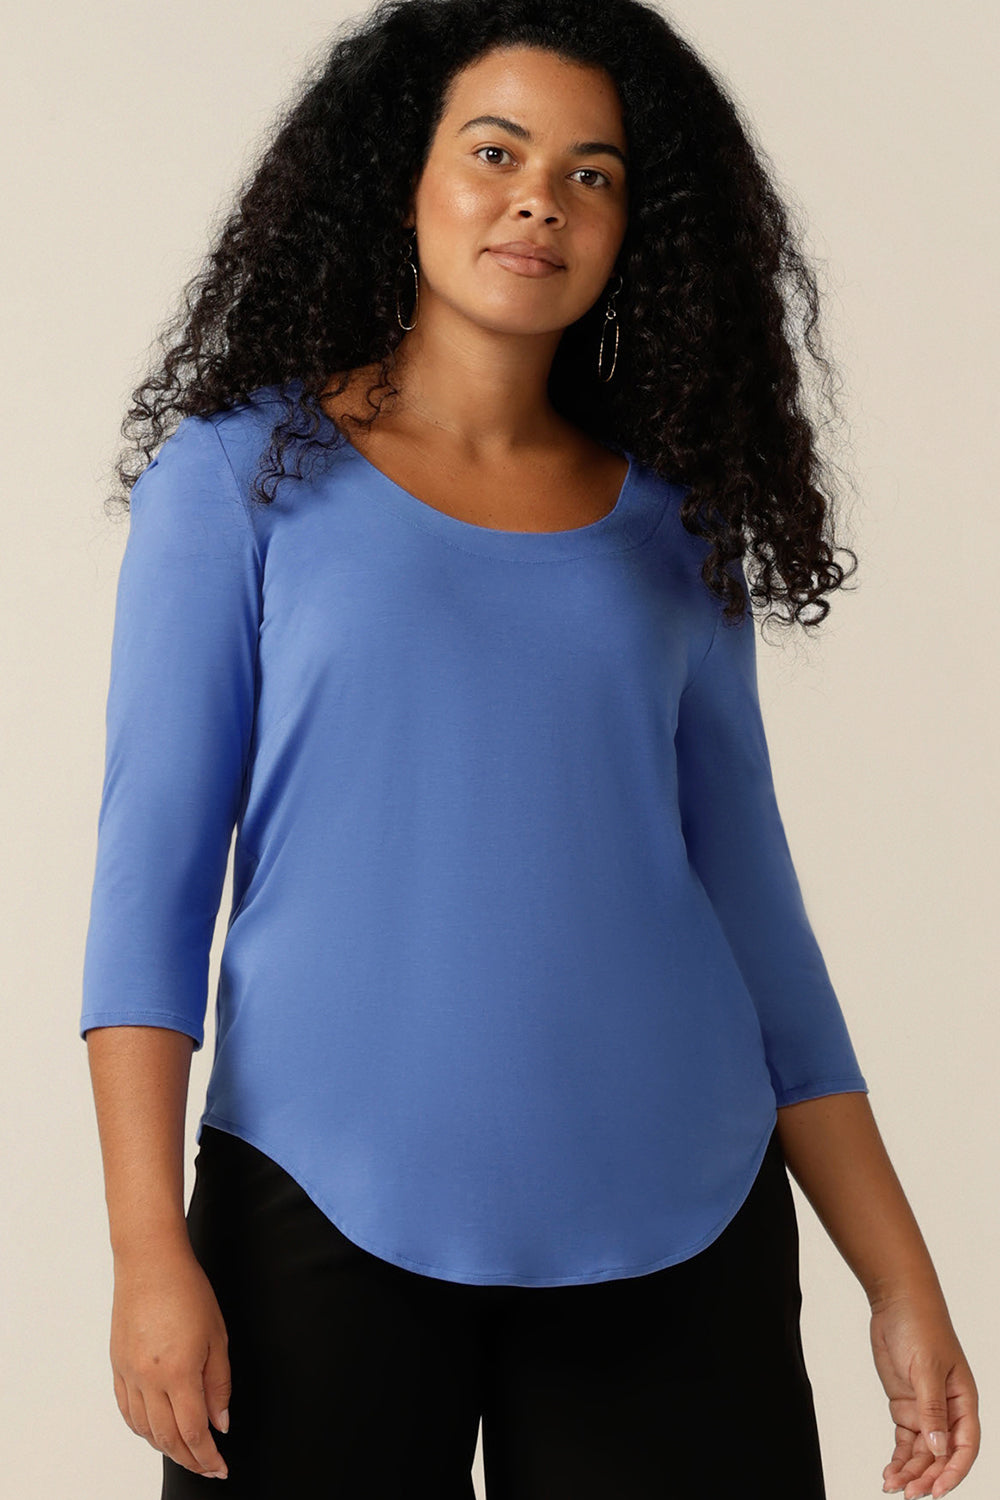 A curvy size 12 woman wears a blue bamboo jersey top. The top has a round neckline, 3/4 sleeves, and a curved shirttail hemline. A top made from sustainable natural fibres, it is a lightweight, breathable top that's made in Australia.